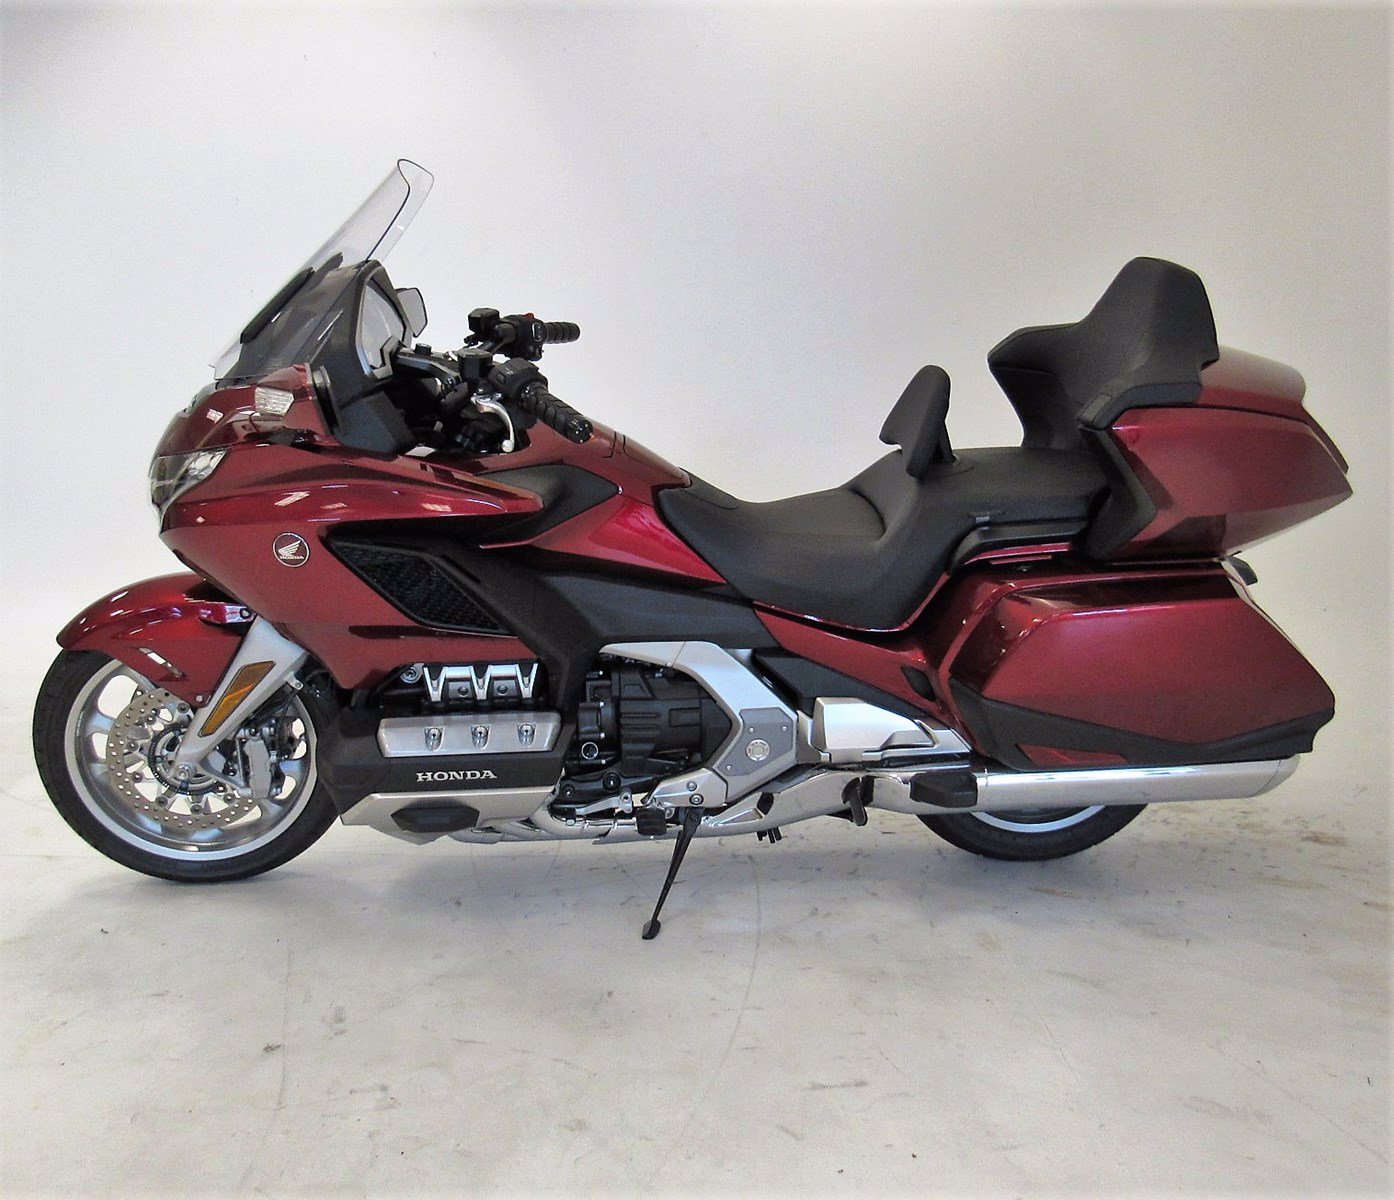 PreOwned 2018 Honda GL1800 Gold Wing Tour Cruiser in